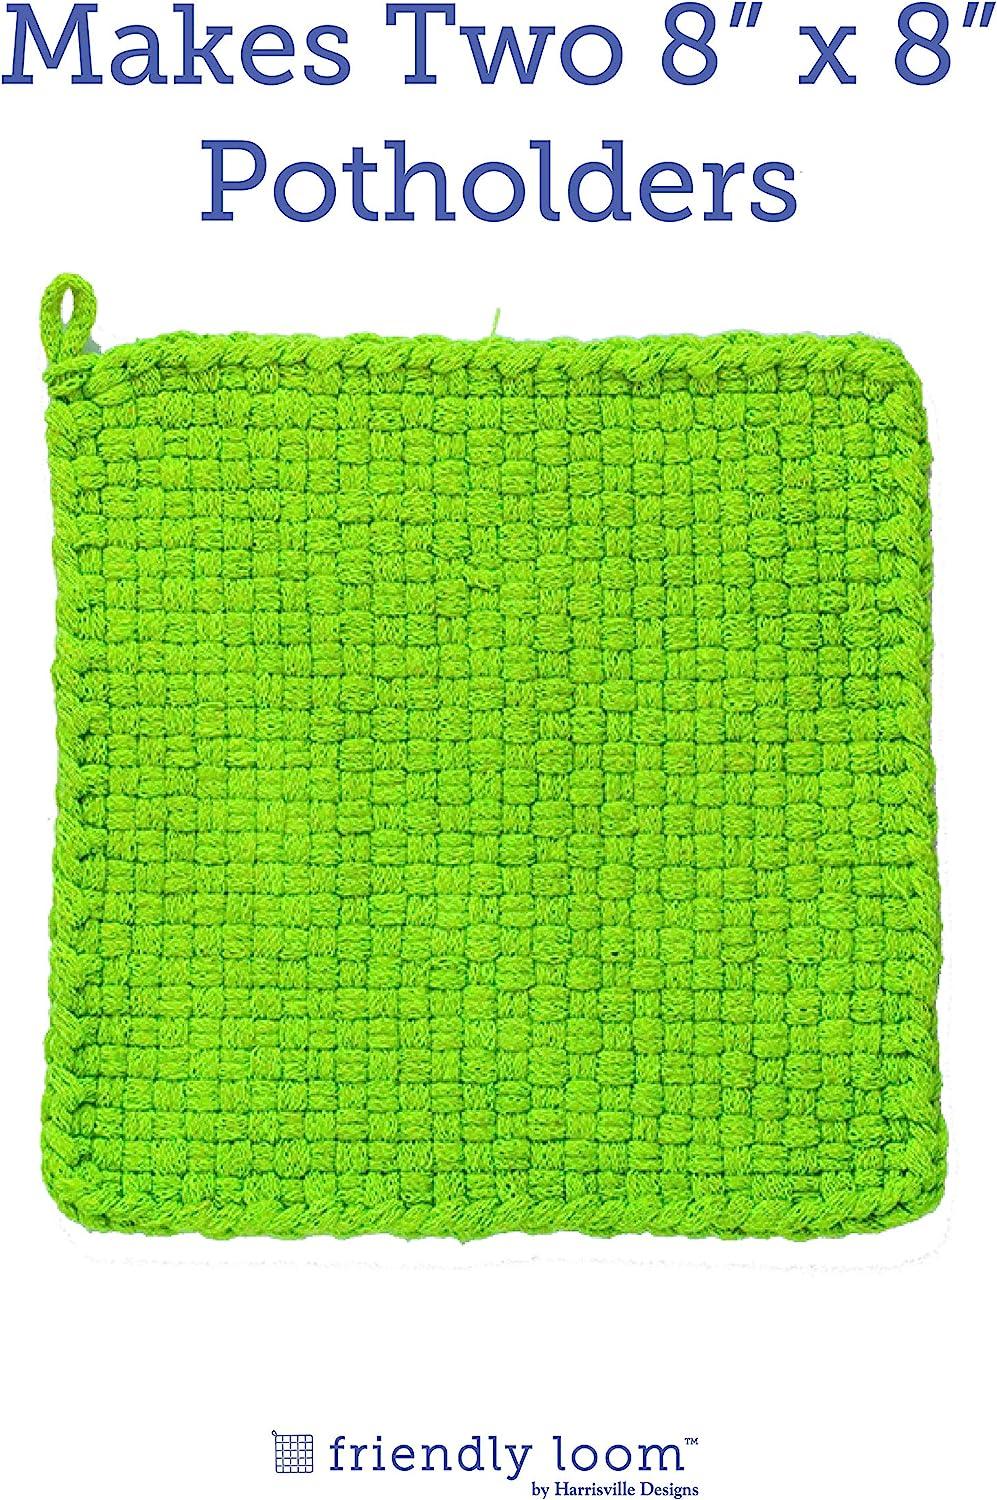 Harrisville Designs Friendly Loom Potholder Cotton Loops 10 Inch Pro Size  Loops Make 2 Potholders, Weaving Crafts for Kids and Adults-Lime